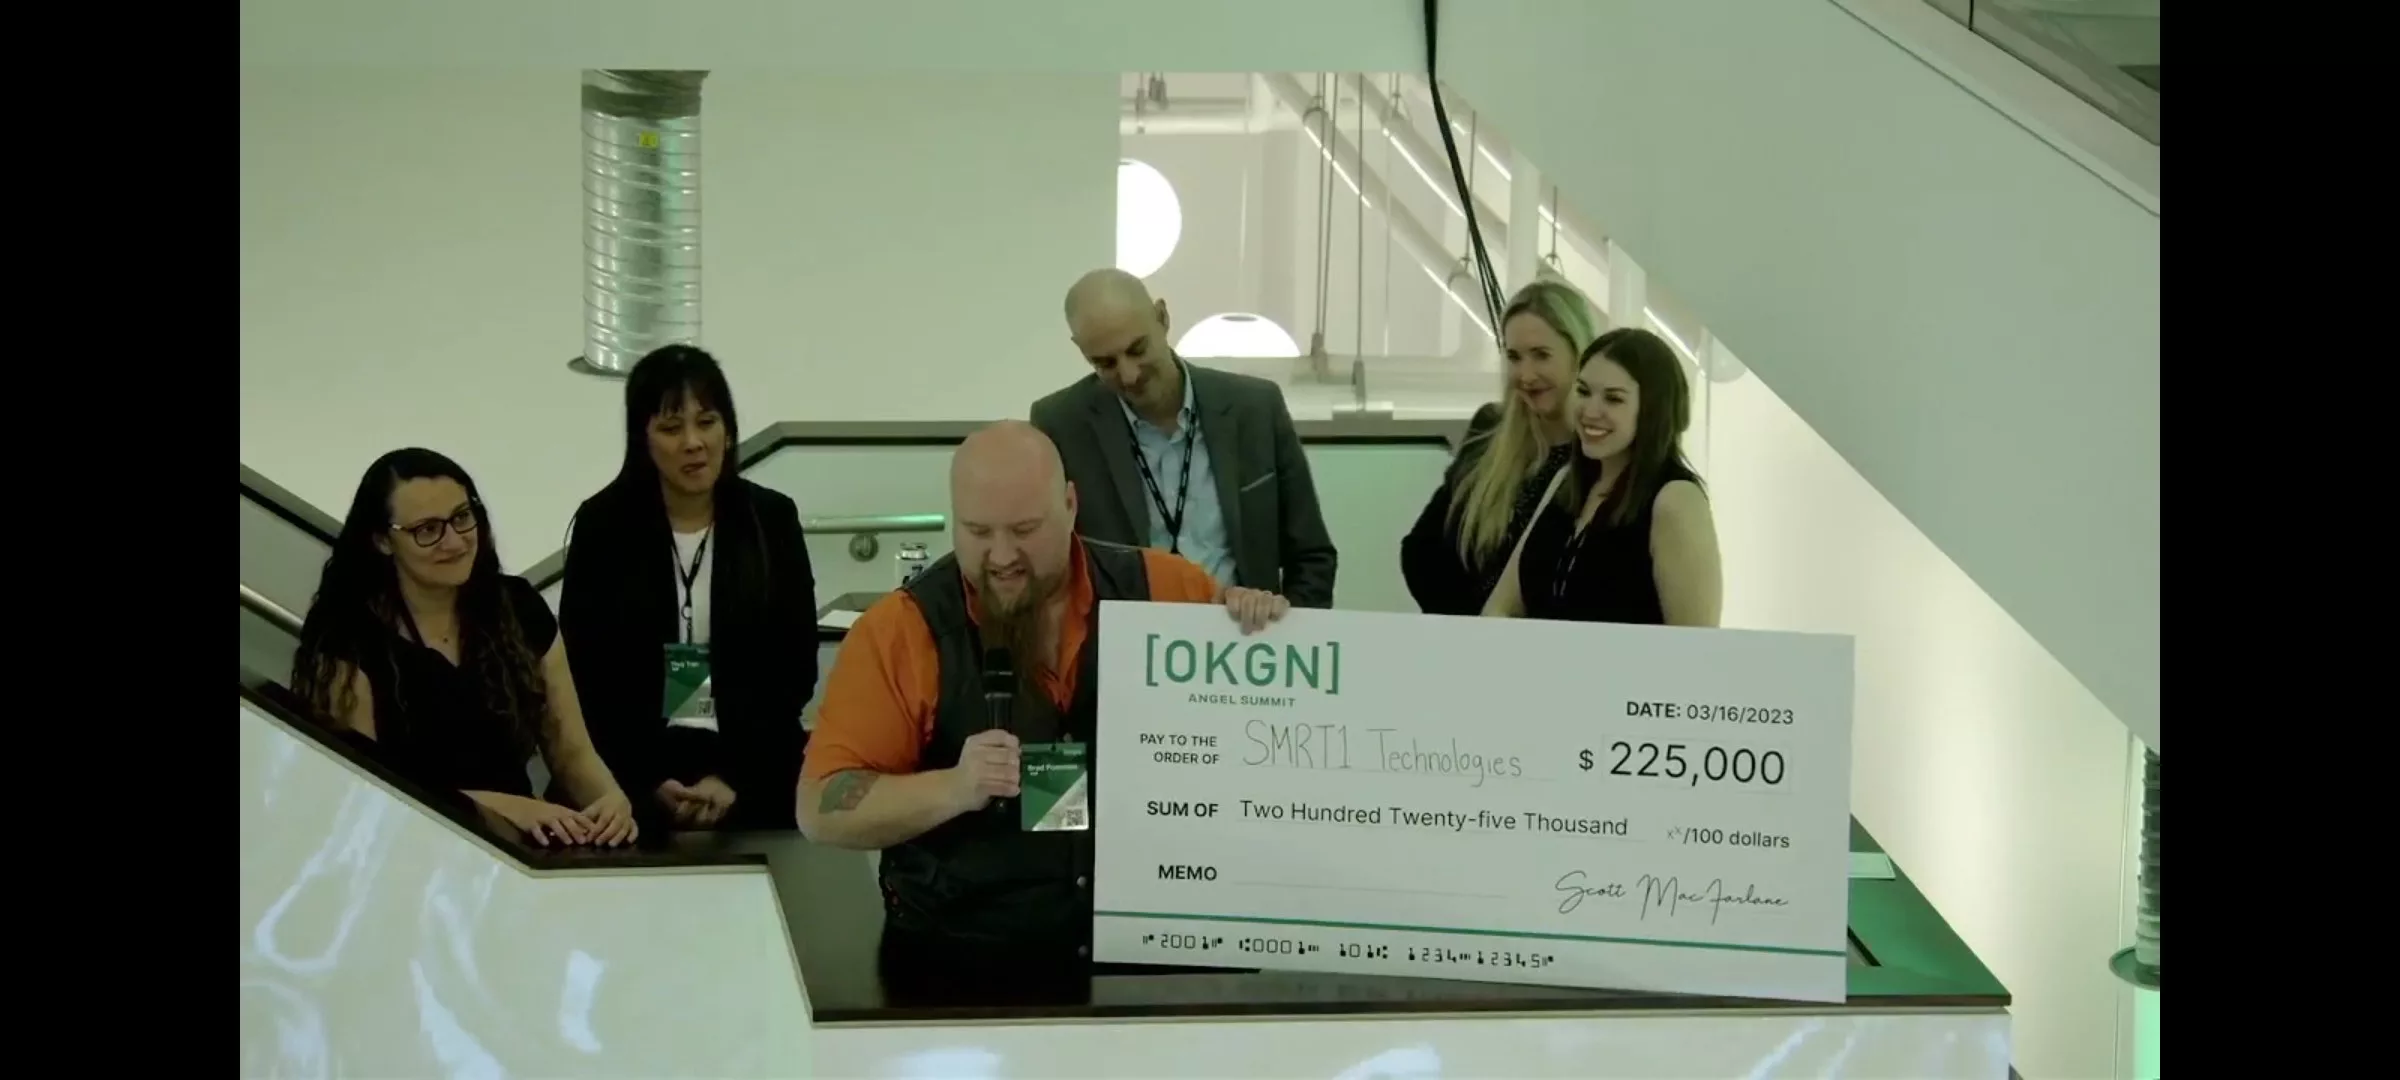 Brad Pommen CEO SMRT1 Technologies holds his $225K investment prize as it's announced SMRT1 has won the top prize at the OKGN Angel Summit 2023